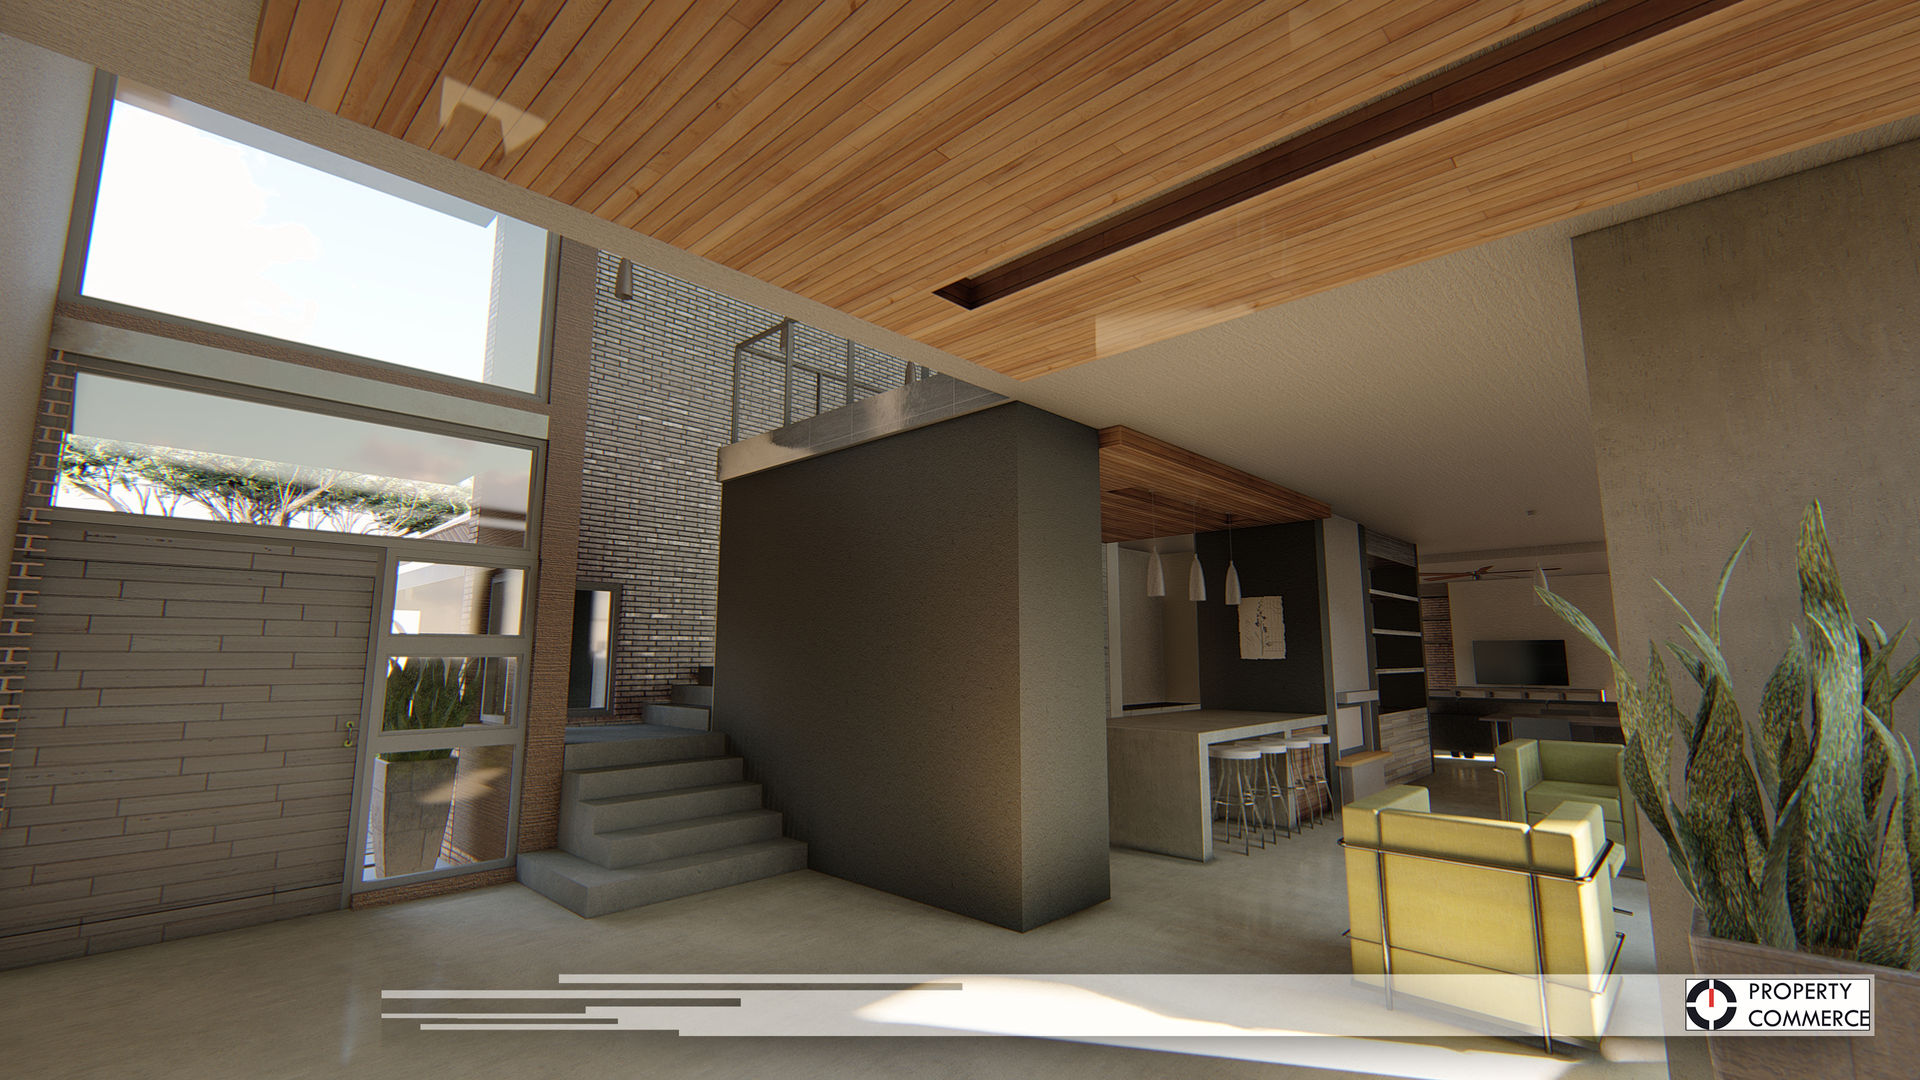 House Ramokoena, Property Commerce Architects Property Commerce Architects Modern Corridor, Hallway and Staircase